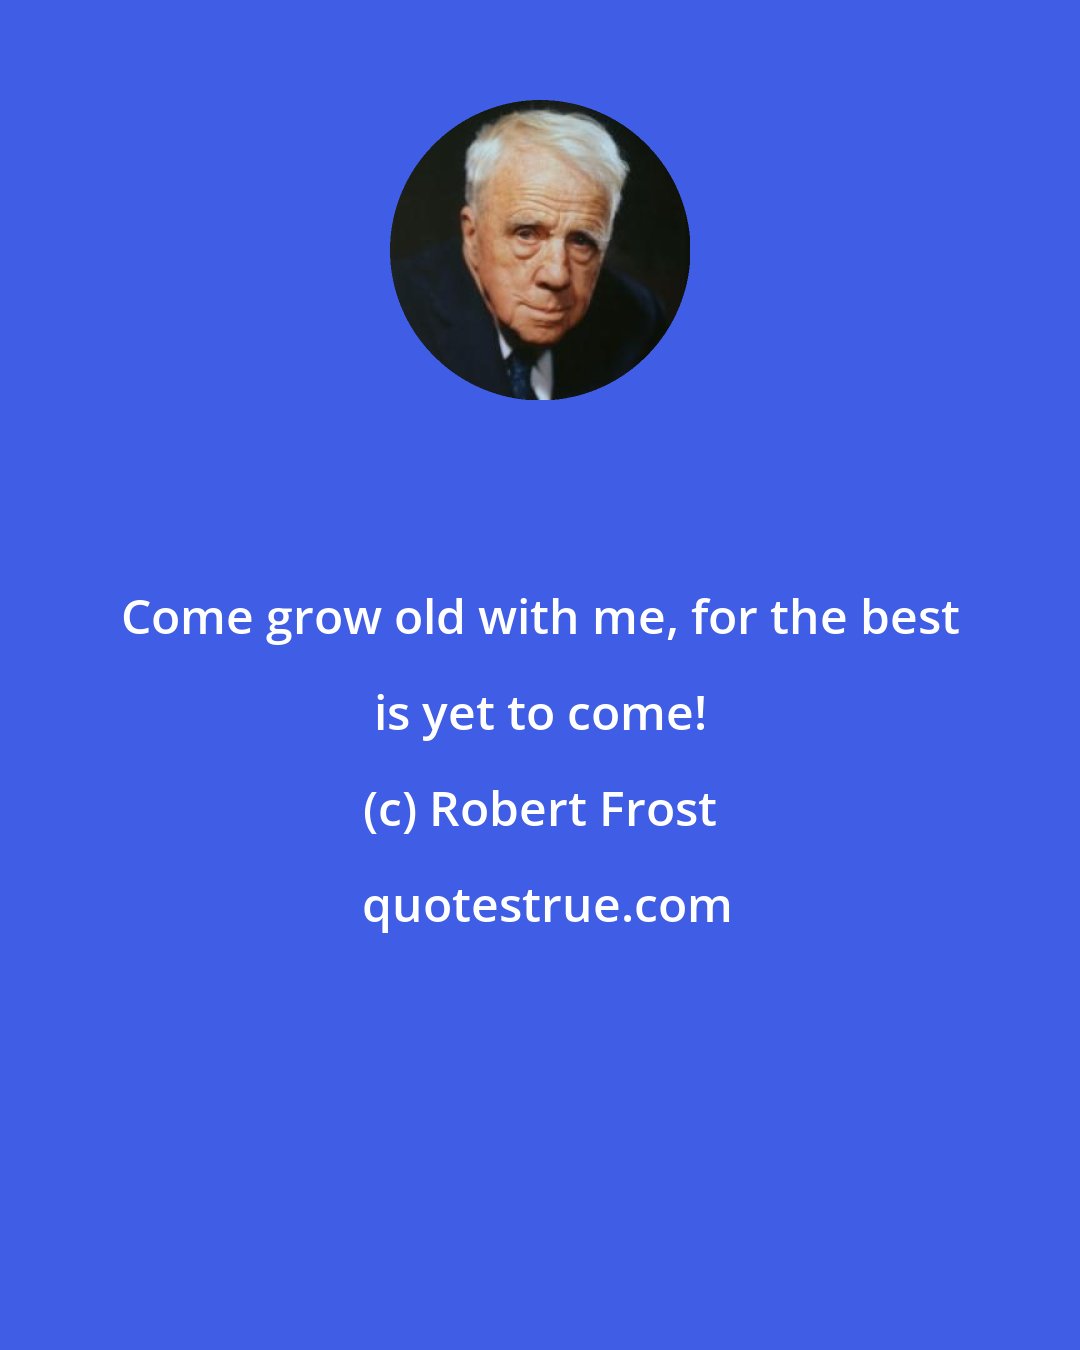 Robert Frost: Come grow old with me, for the best is yet to come!